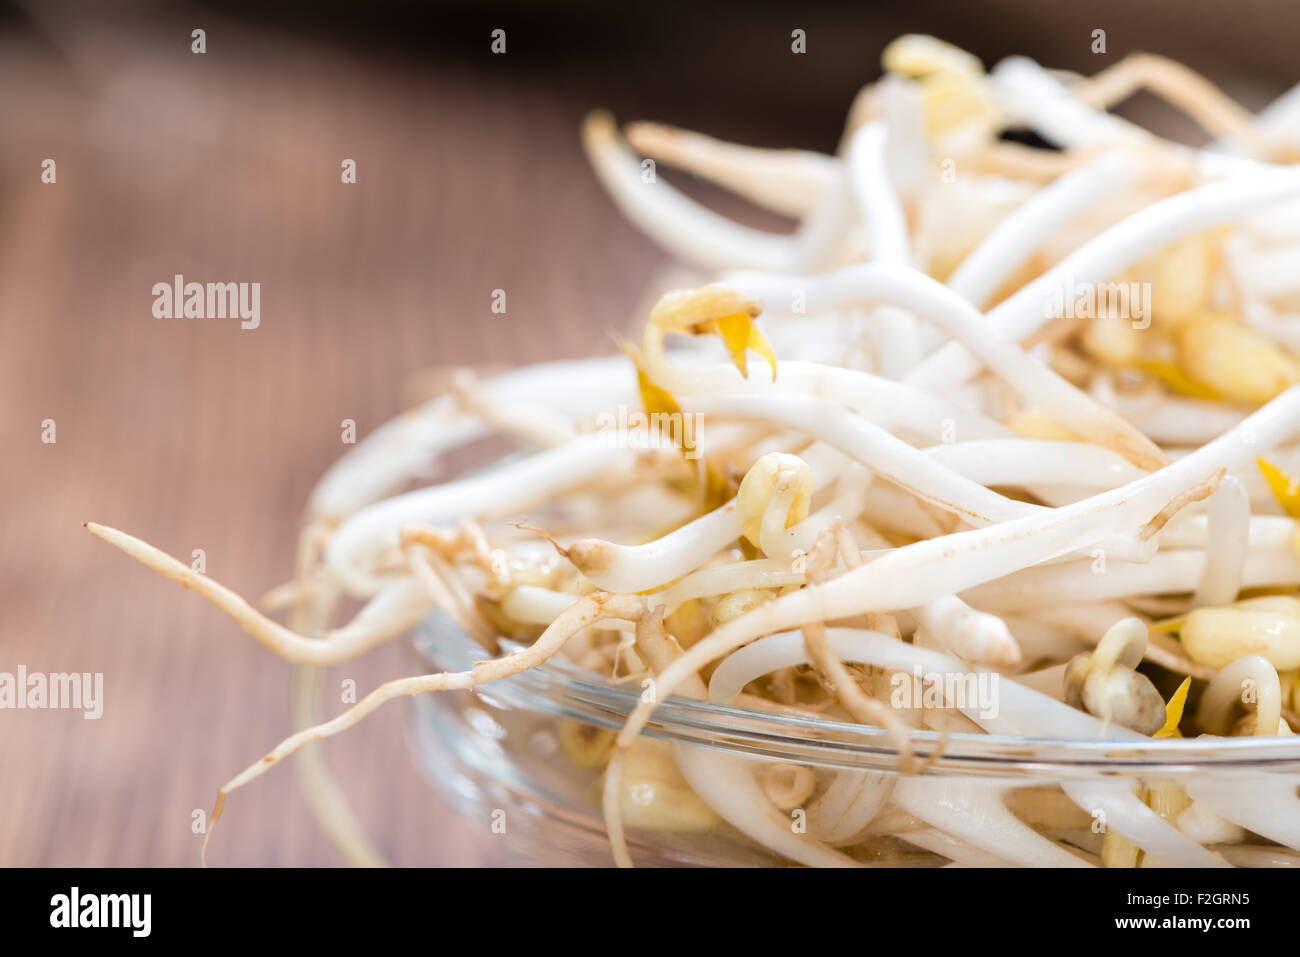 Bowl with Mungbean Sprouts on wooden background Stock Photo